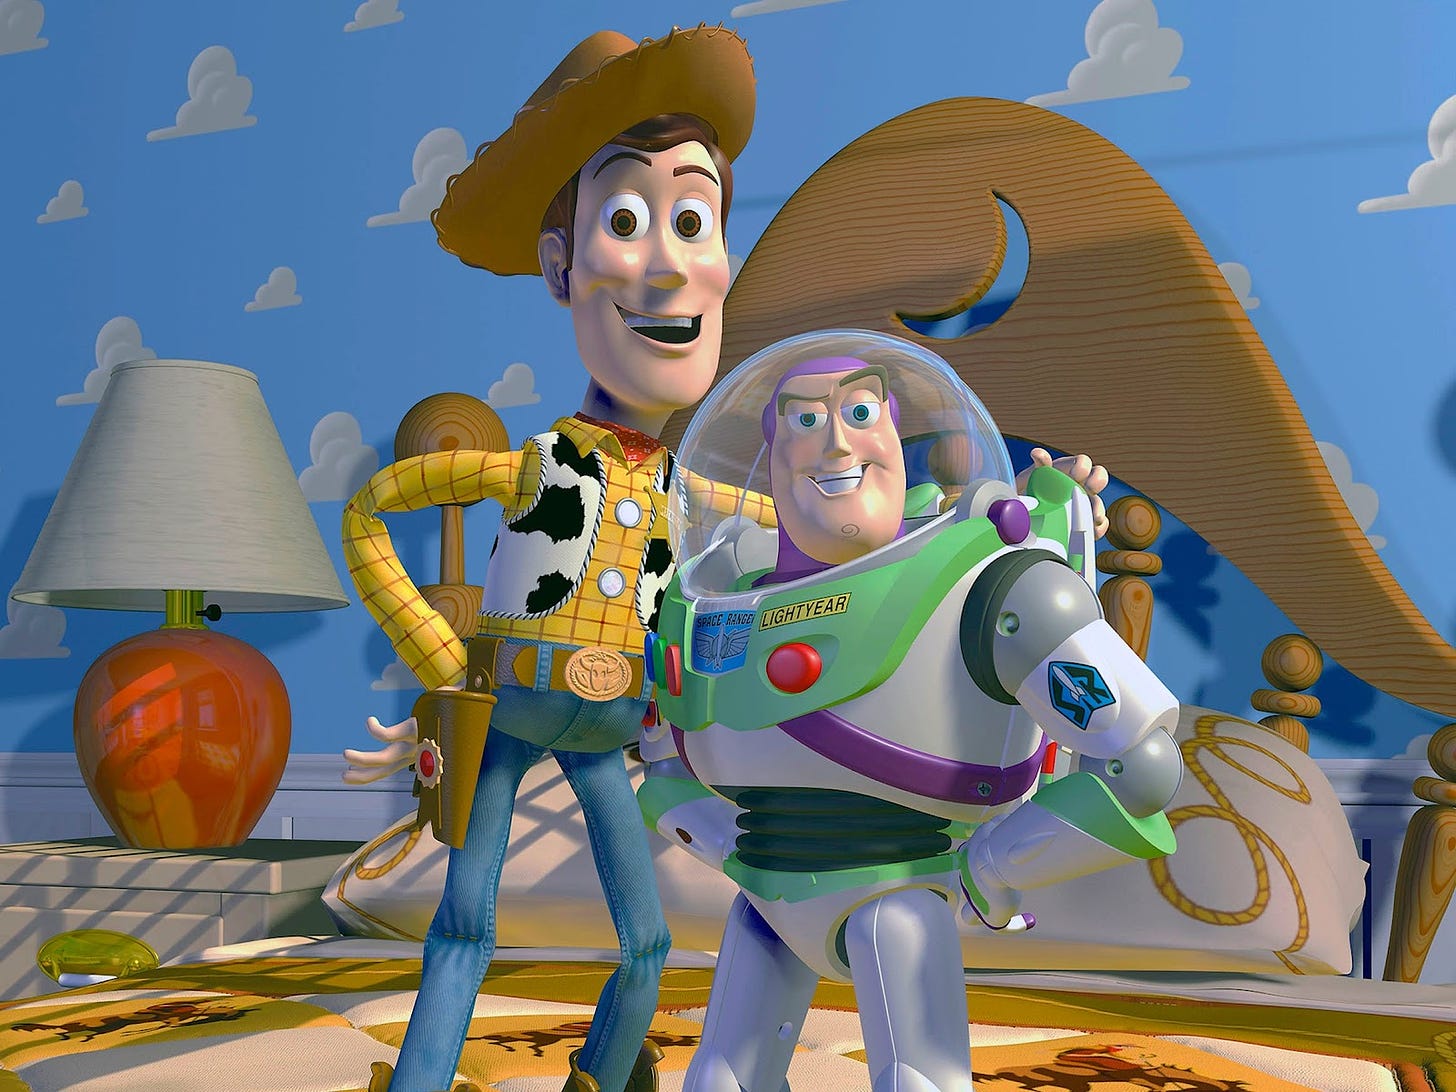 Toy Story 3': Woody, Buzz face abandonment issues